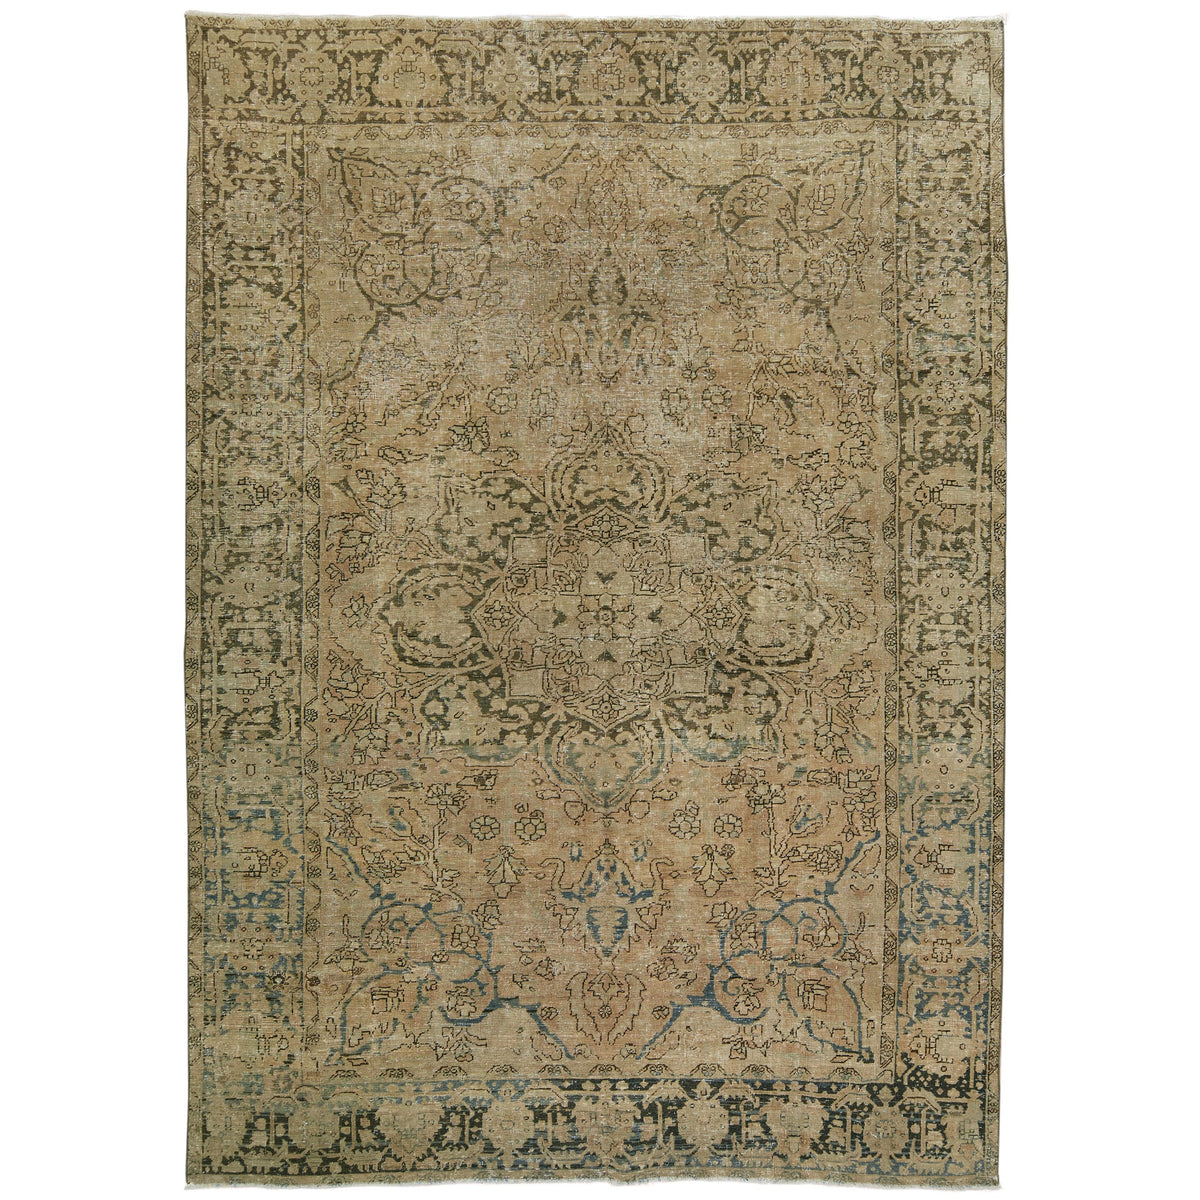 Shirley - Heritage and Hue in Harmony | Kuden Rugs